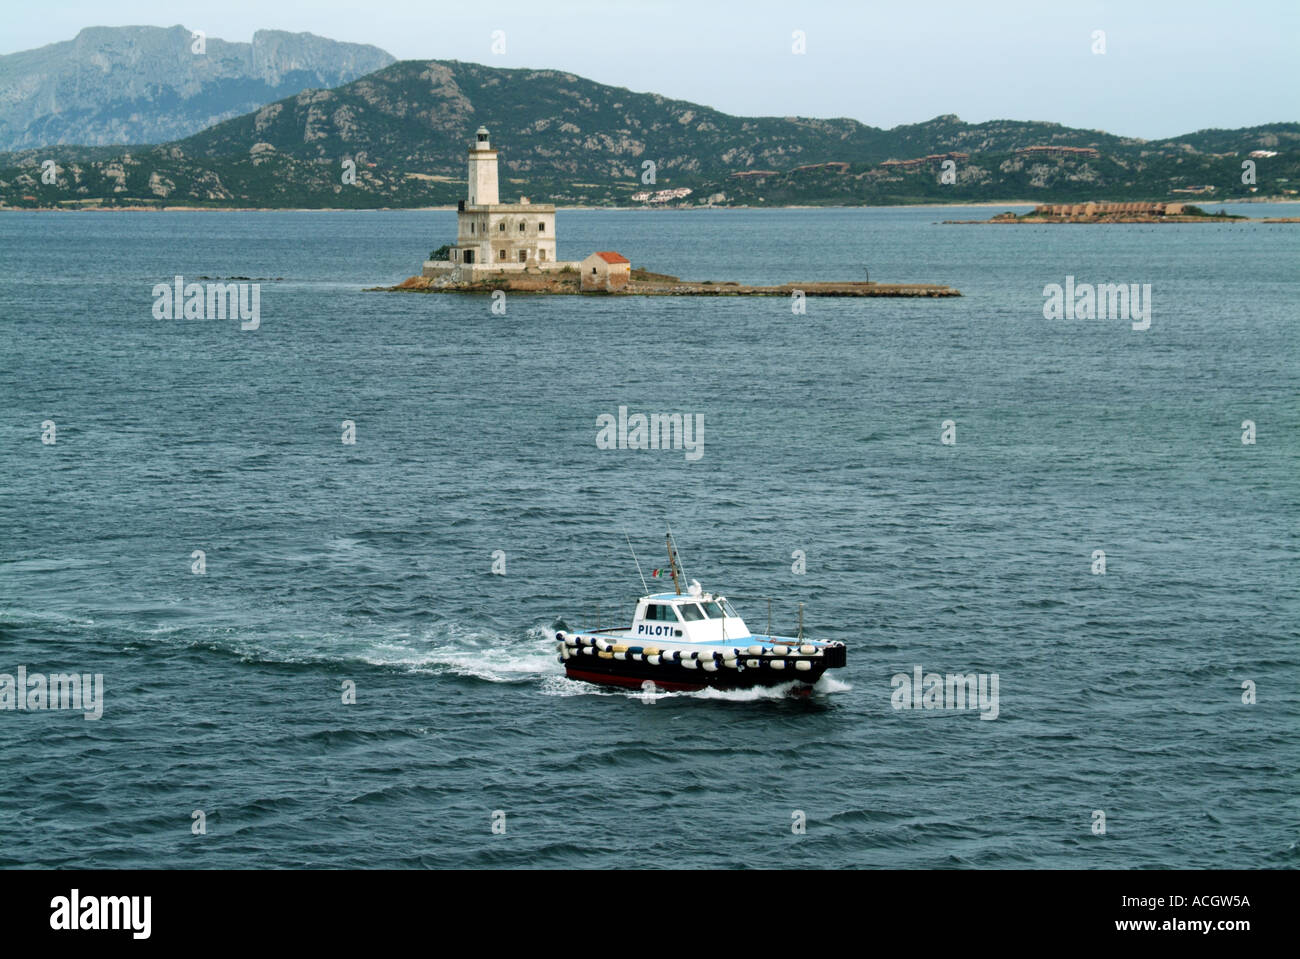 Olbia Sardina port approaches and lighthouse with pilot launch arriving Stock Photo